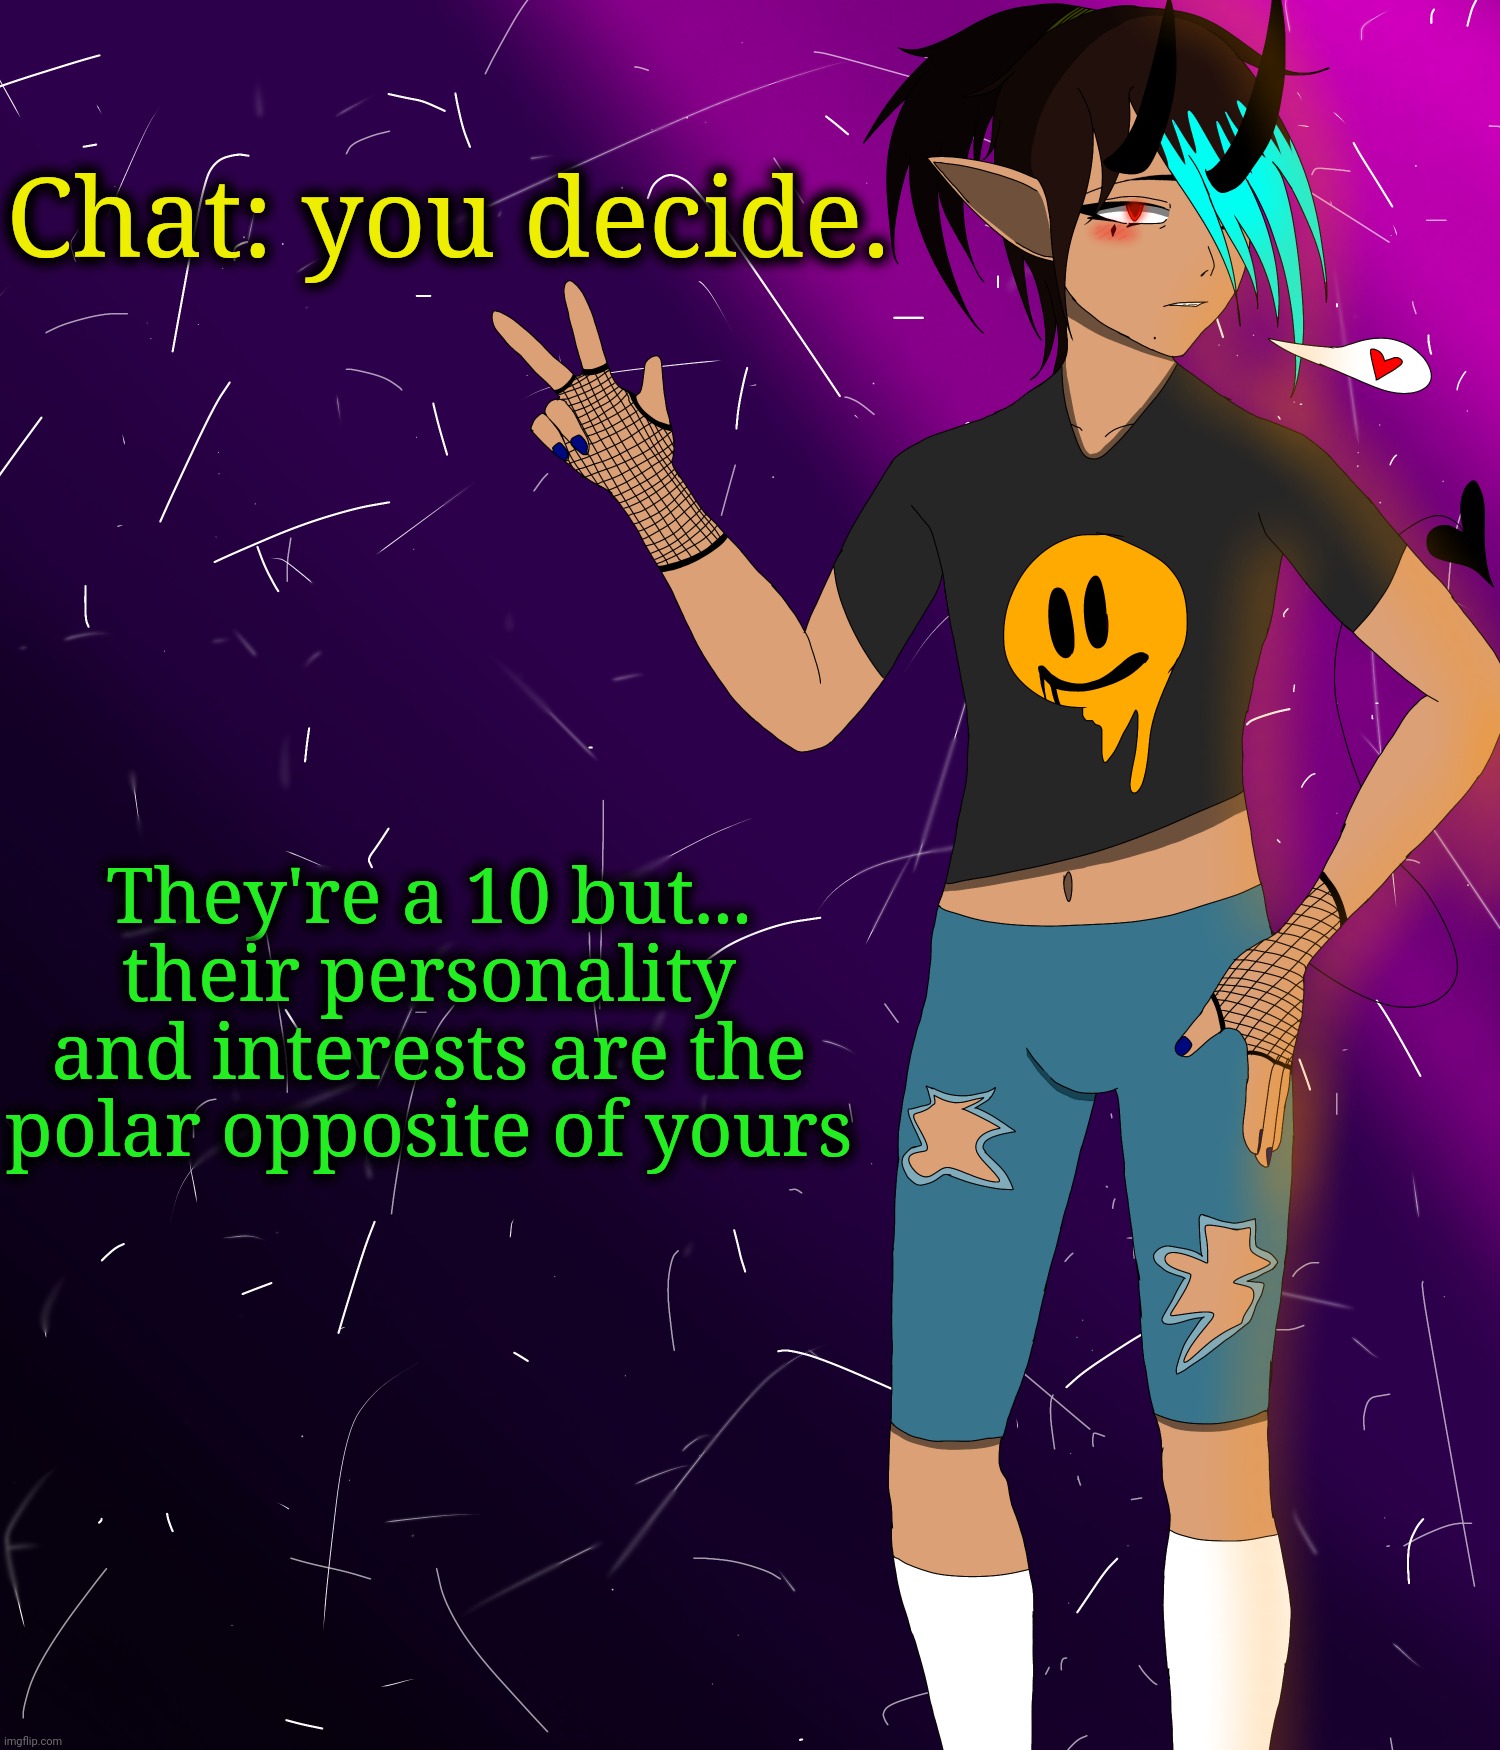 Spire jus chillin I guess | Chat: you decide. They're a 10 but... their personality and interests are the polar opposite of yours | image tagged in spire jus chillin i guess | made w/ Imgflip meme maker